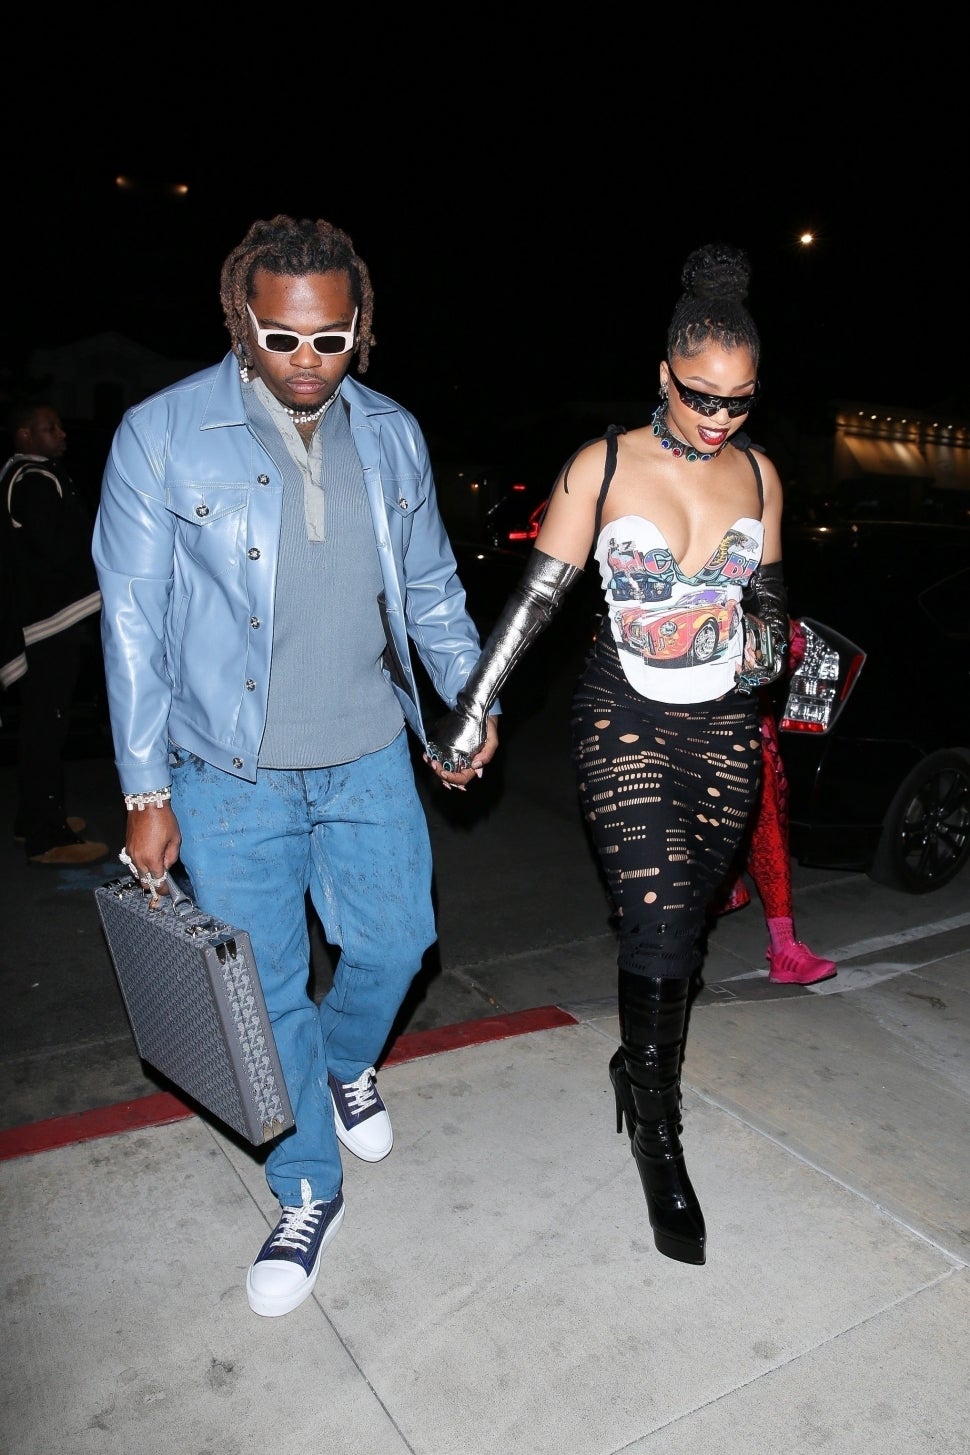 Gunna and Chloe Bailey out shopping at H.Lorenzo Men on Sunset Plaza in Hollywood.